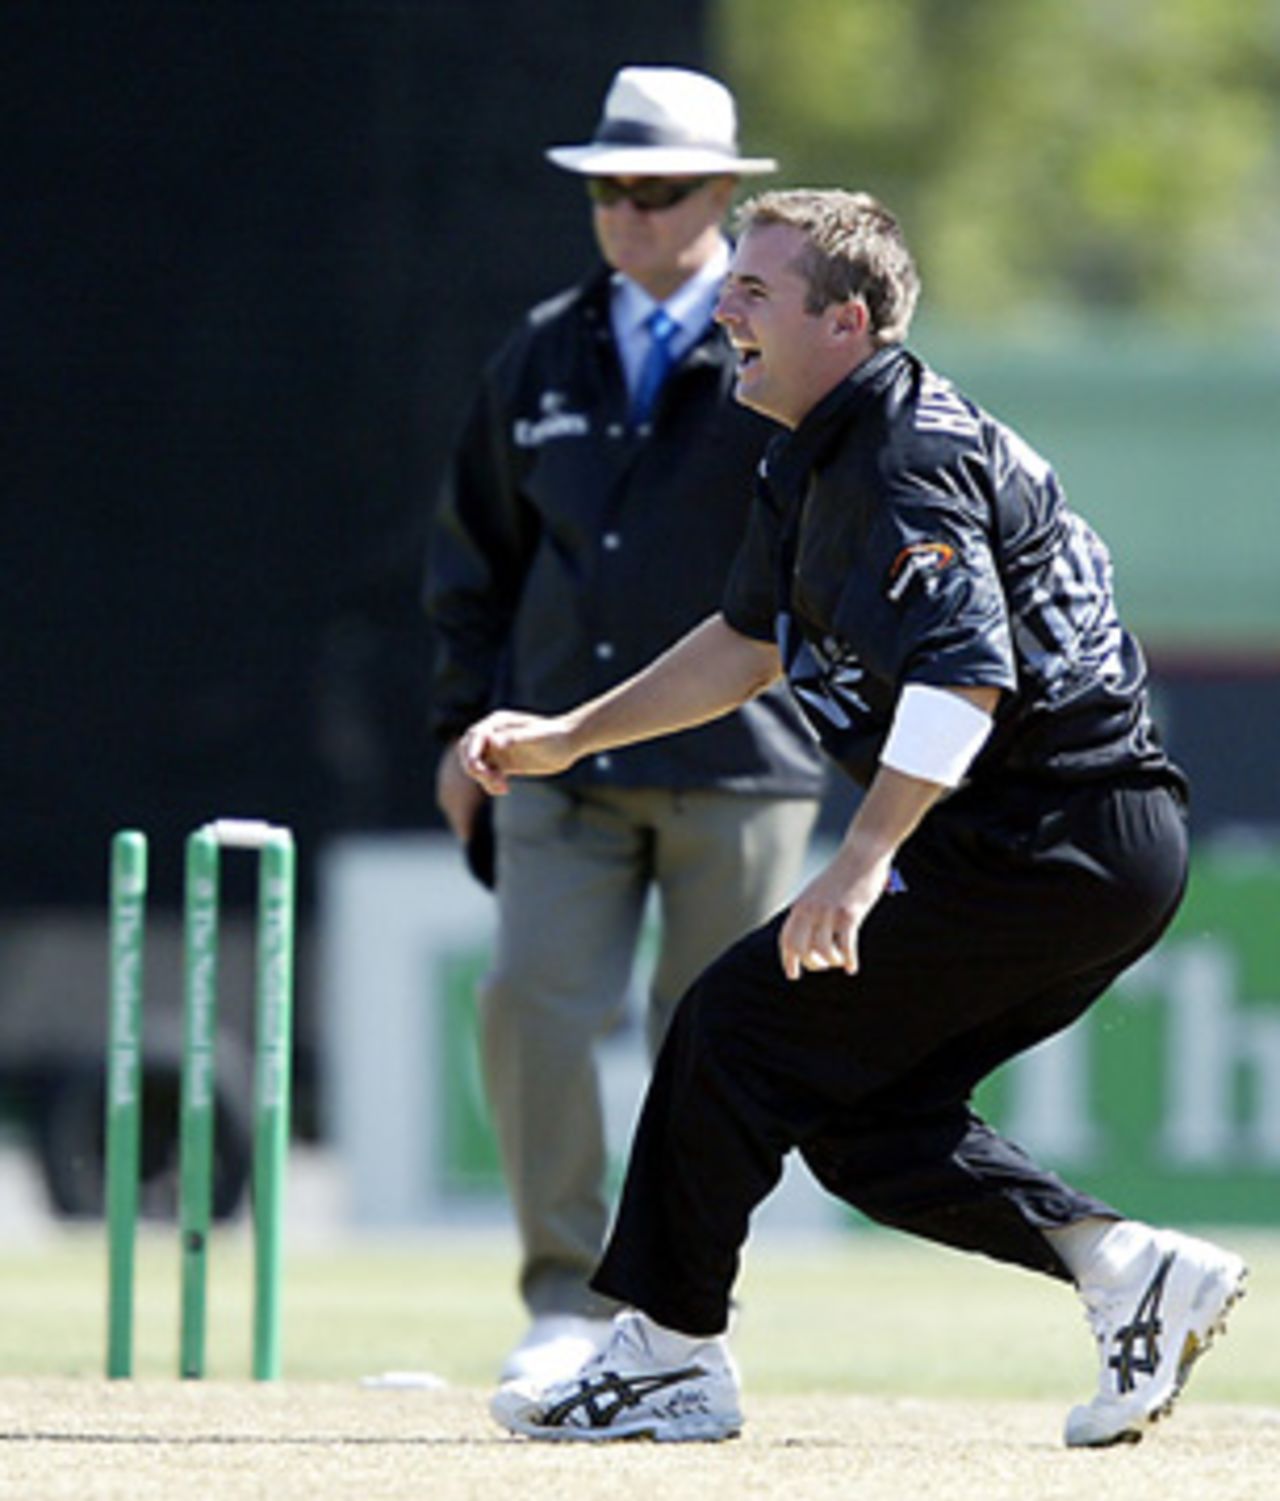 New Zealand bowler Paul Hitchcock celebrates the dismissal of Indian batsman Yuvraj Singh, run out by Hitchcock for 12. Umpire Doug Cowie looks on in the background. 3rd ODI: New Zealand v India at Jade Stadium, Christchurch, 1 January 2003.